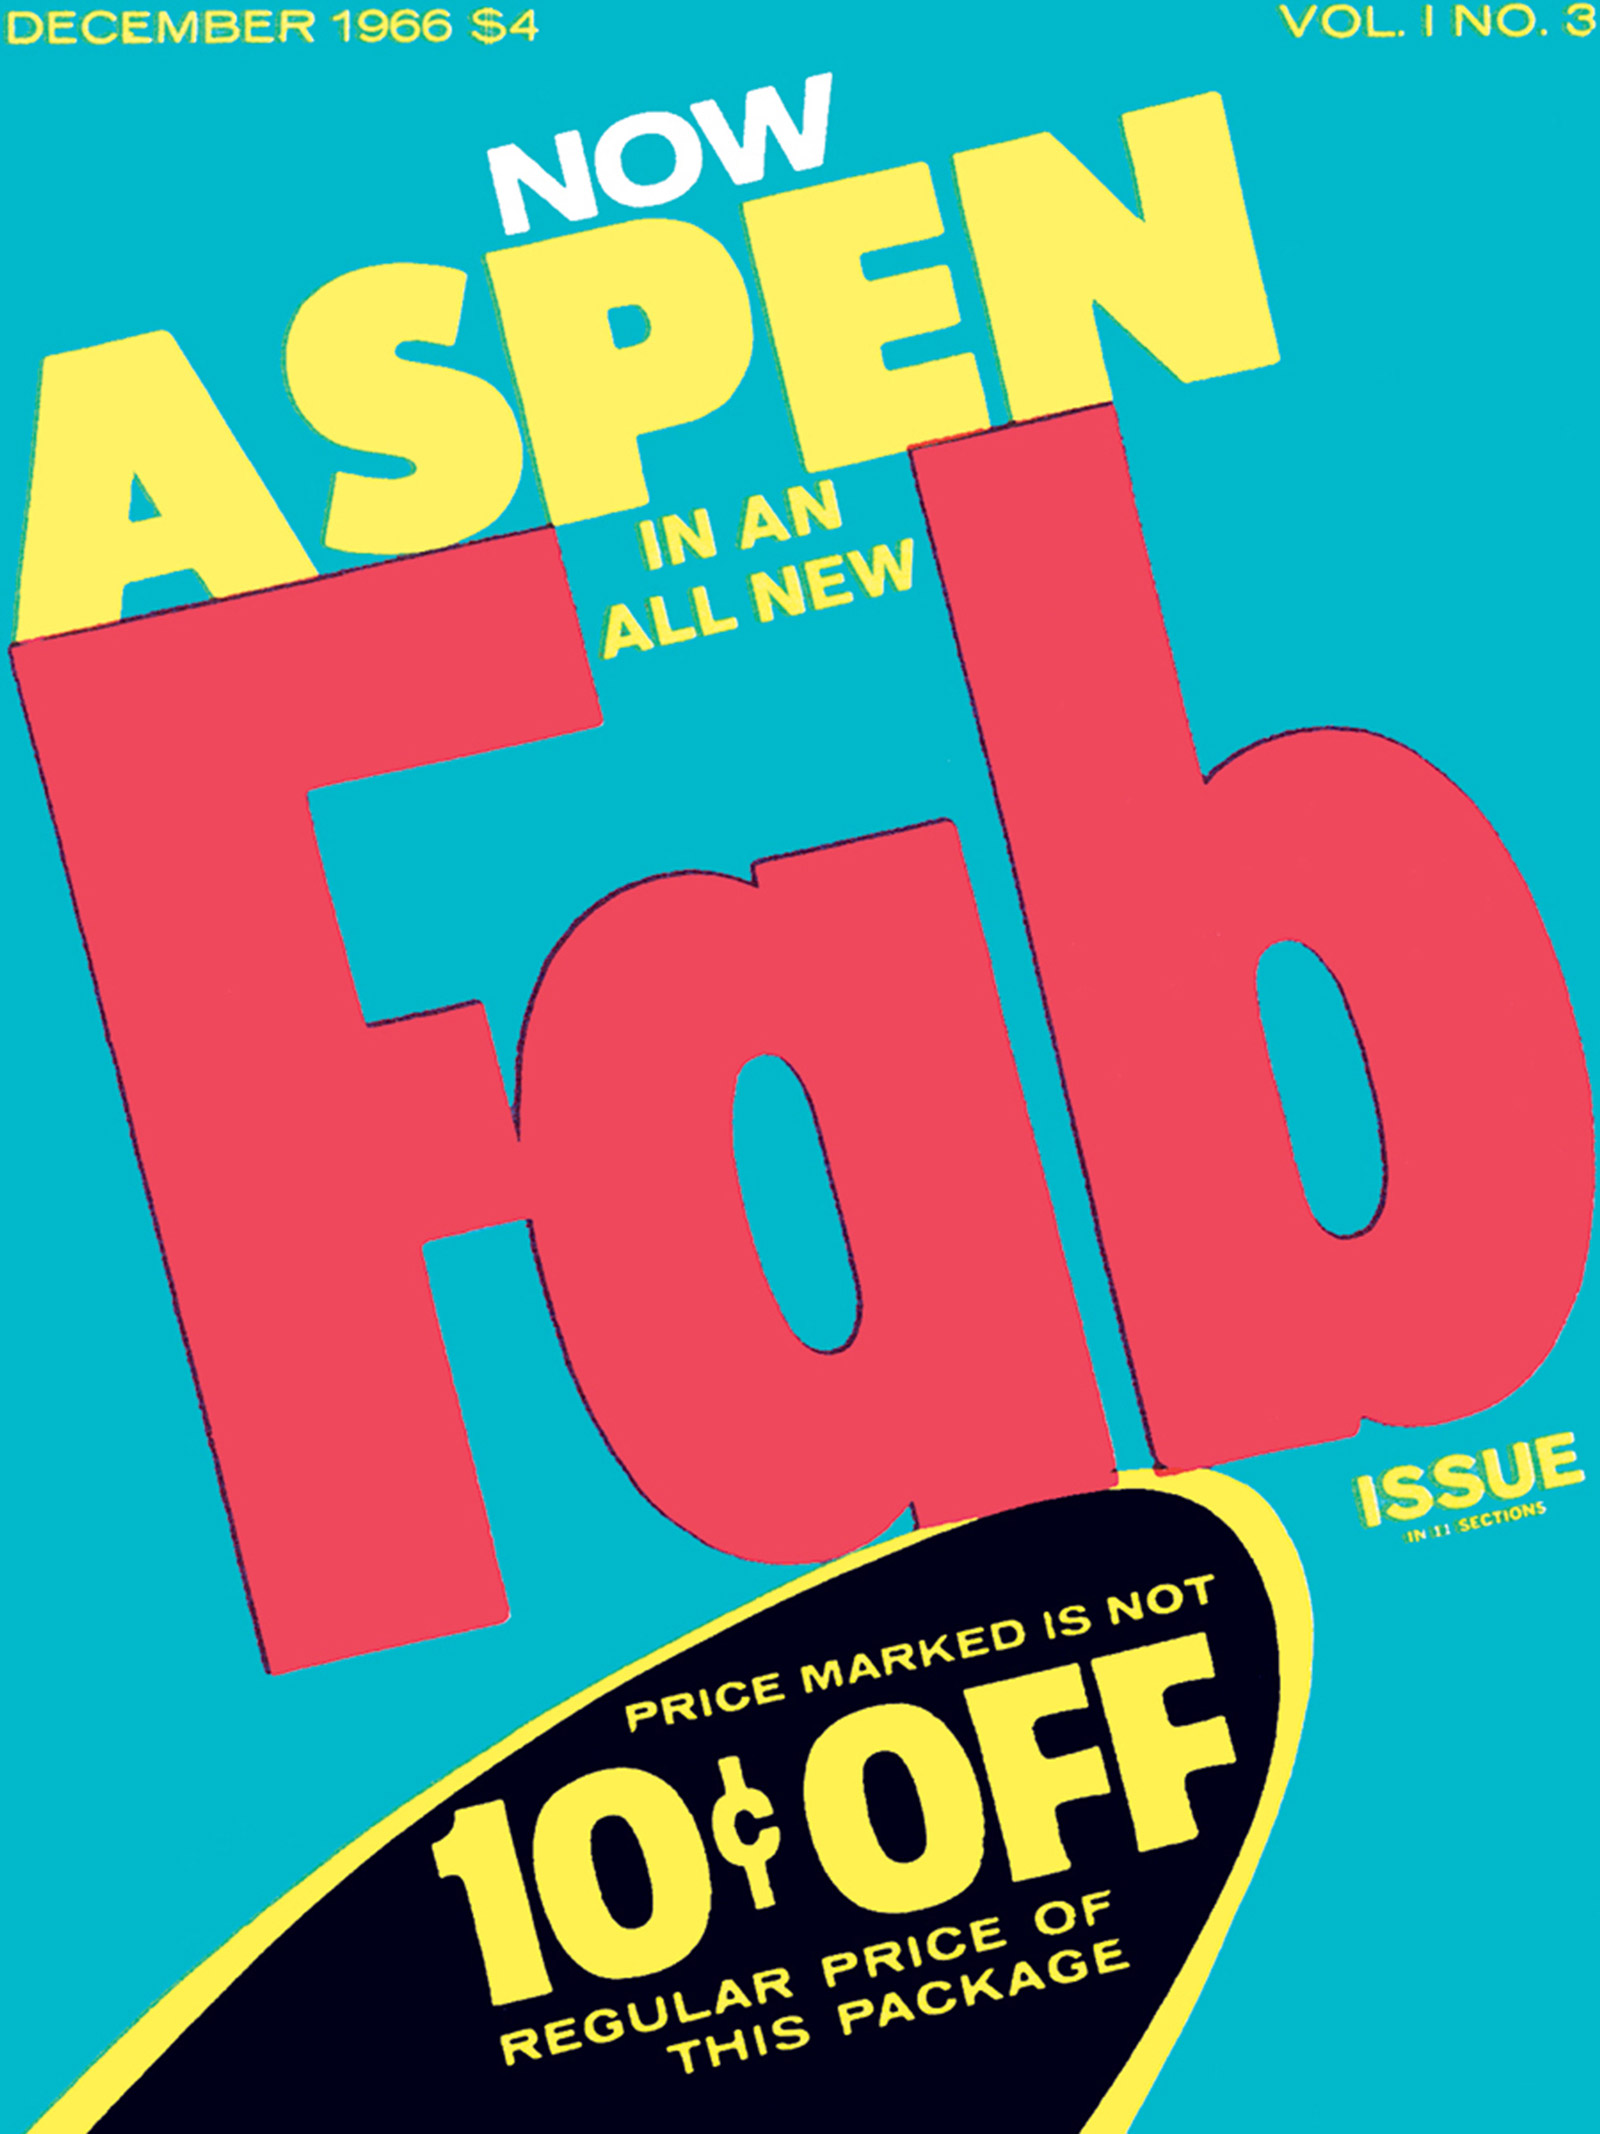 A nineteen sixty-six fluorescent cover of “Aspen”, volume 1, issue 3, designed by Andy Warhol.